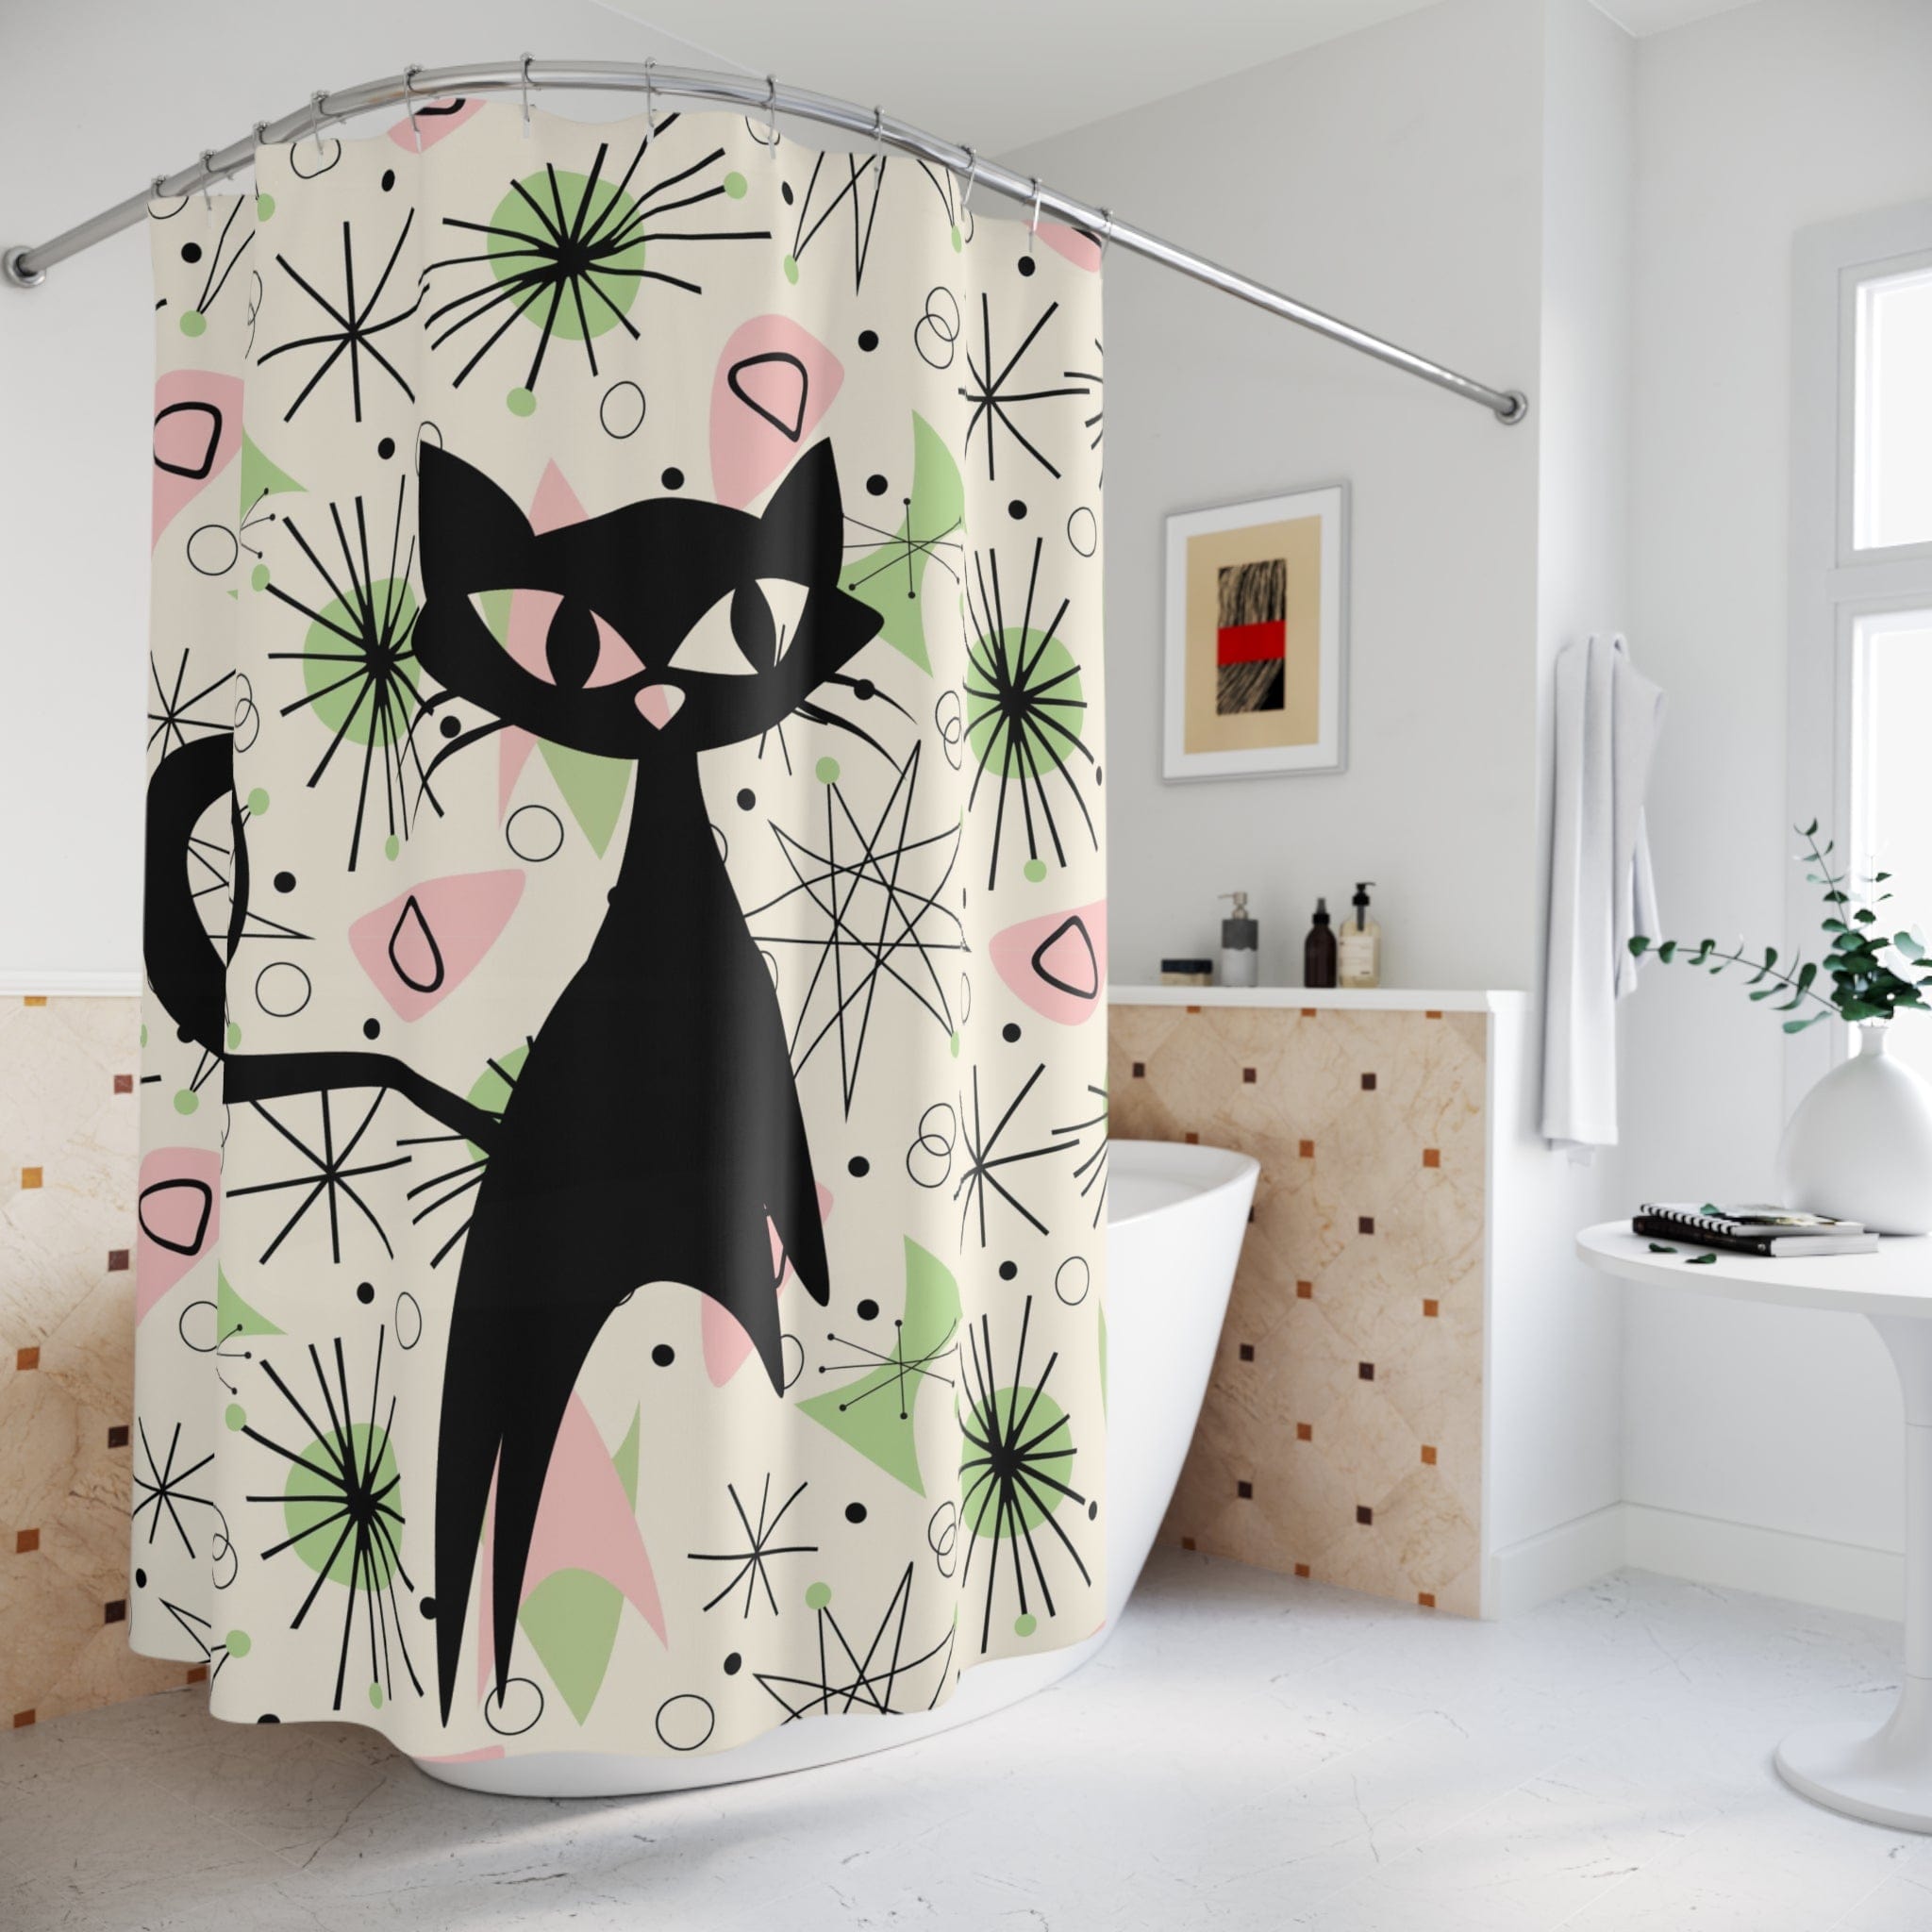 Atomic Cat, Sky Rocket Space Cat, Up Up And Away, Atomic Starburst, Mid Century Modern Shower Curtain Home Decor 71&quot; × 74&quot;